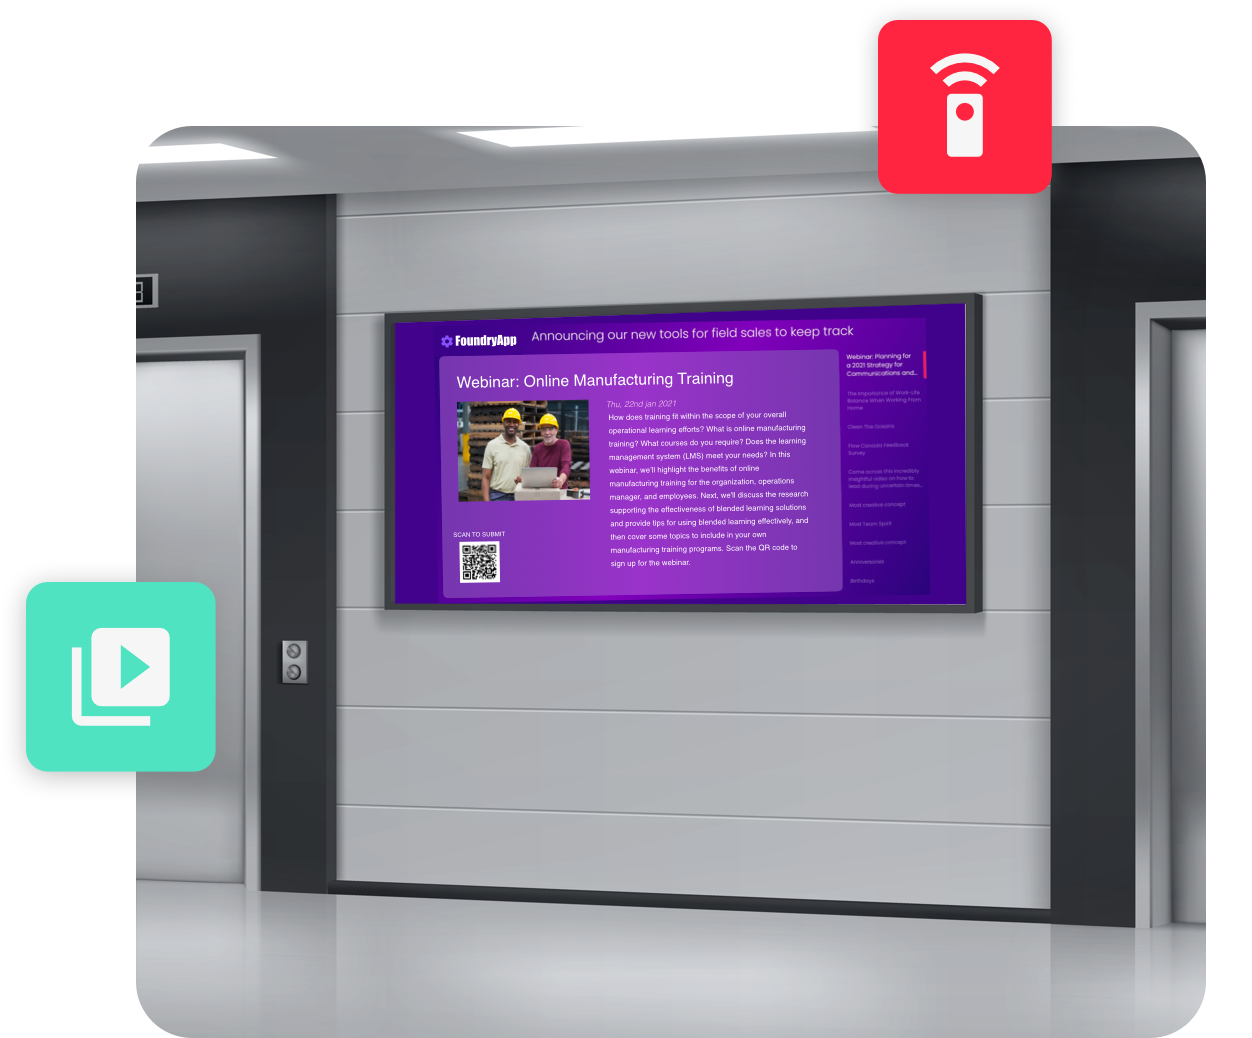 HubEngage Software - Deploy a stunning digital display solution that streams the latest employee communications content to your displays in a multitude of settings. Your employees can scan QR codes to unlock apps that give a more personalized experience on the go!